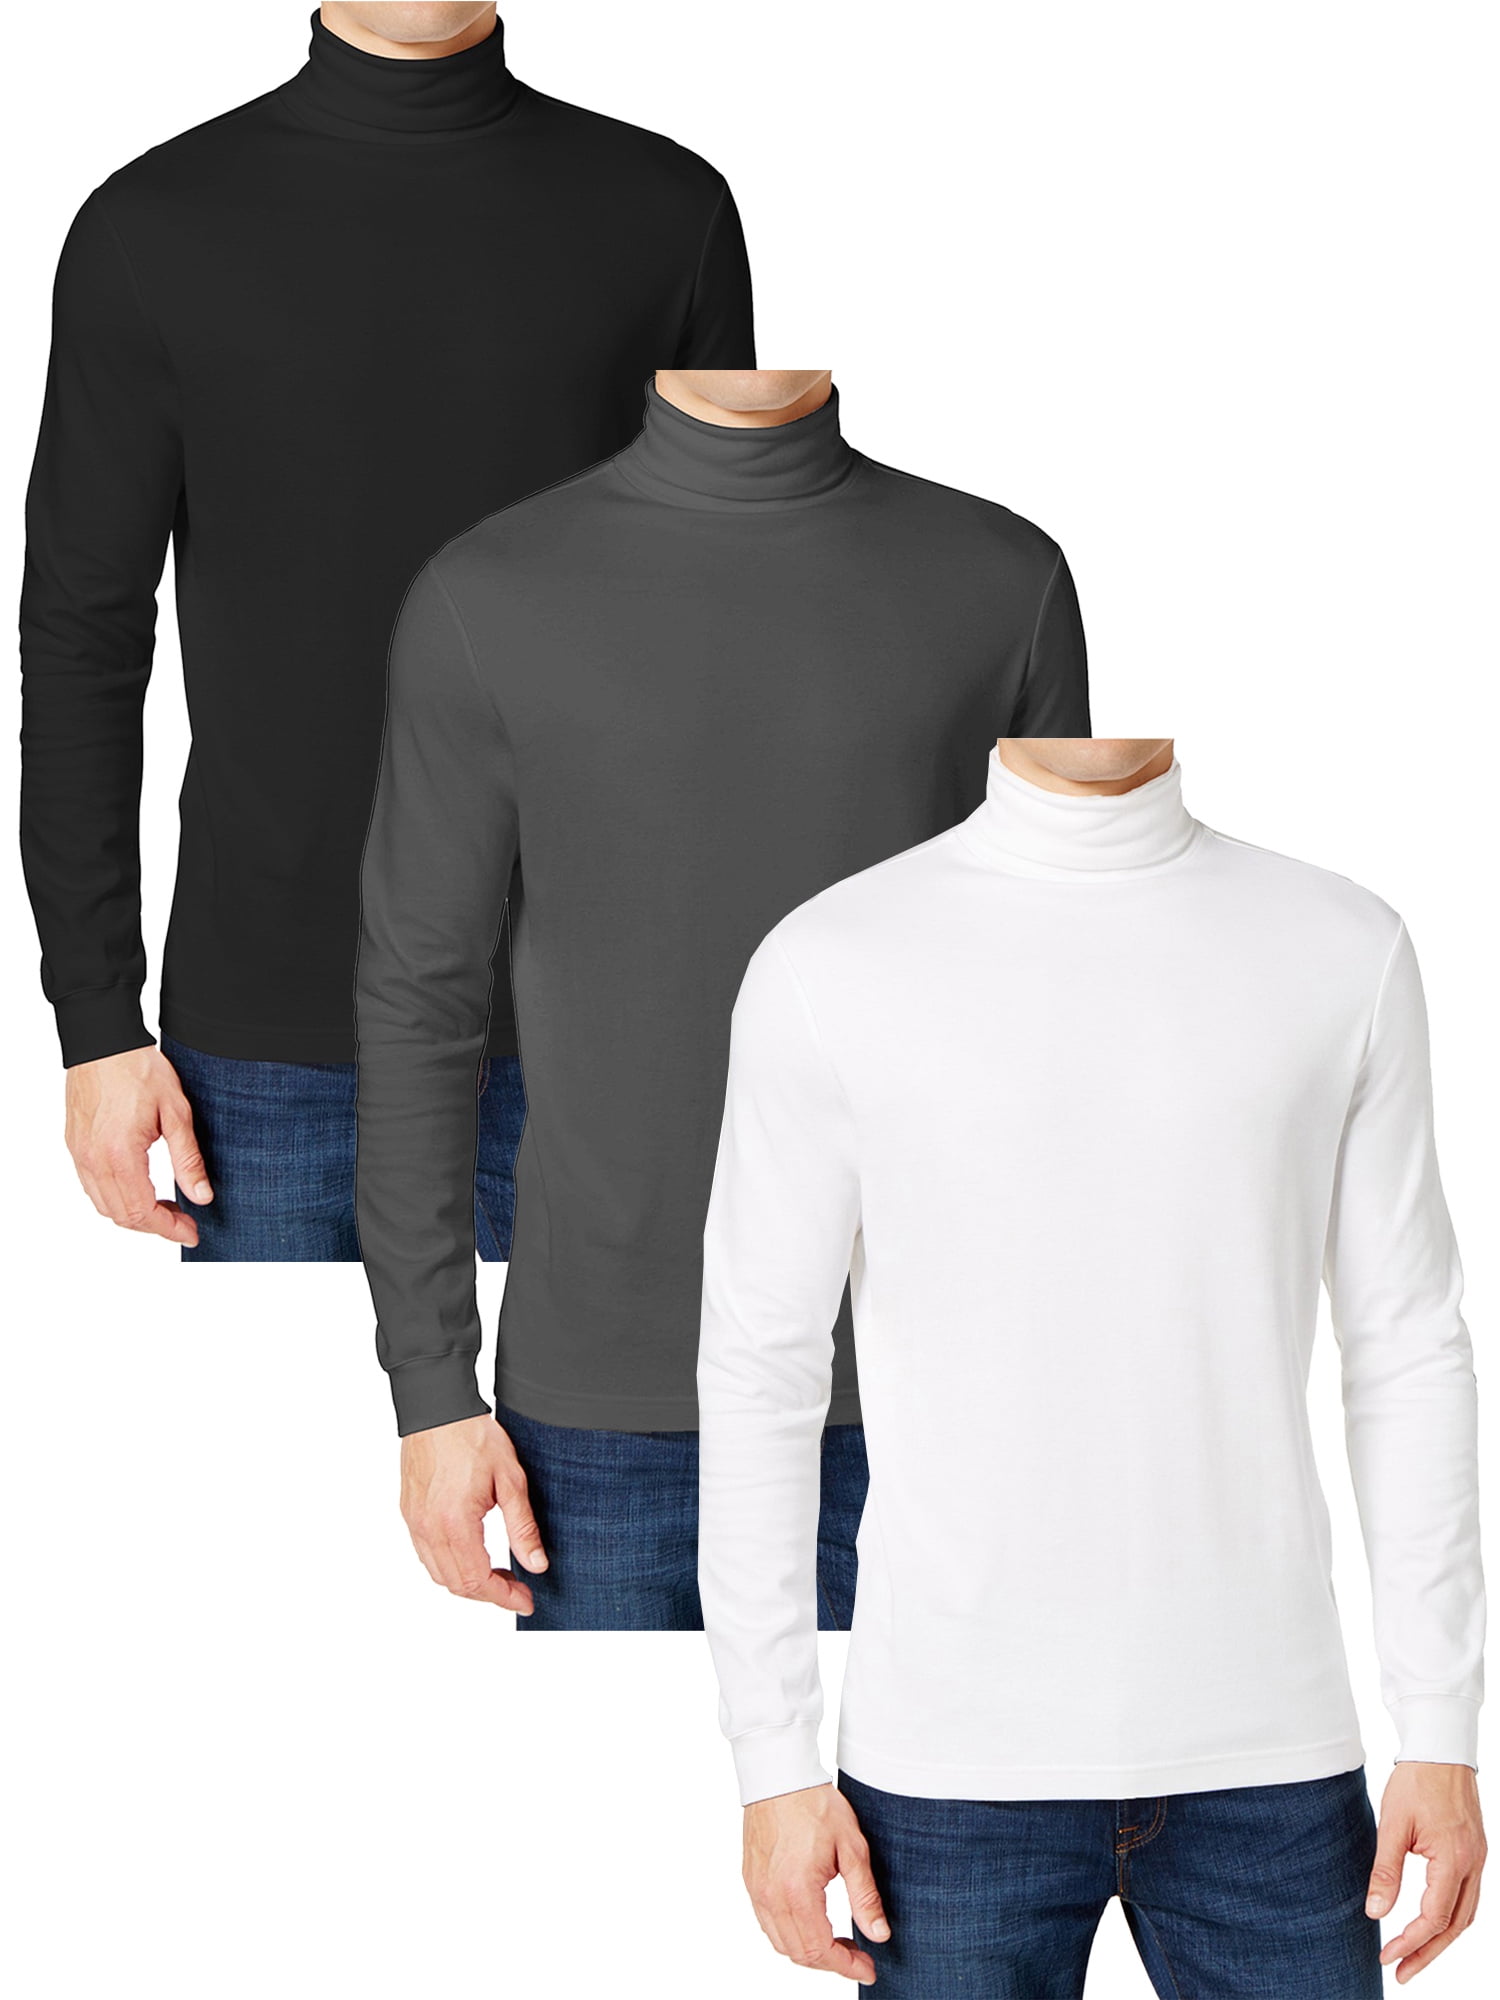 3-Pack Men's Long Sleeve Turtle Neck T-Shirt (Sizes, S to 2XL) -